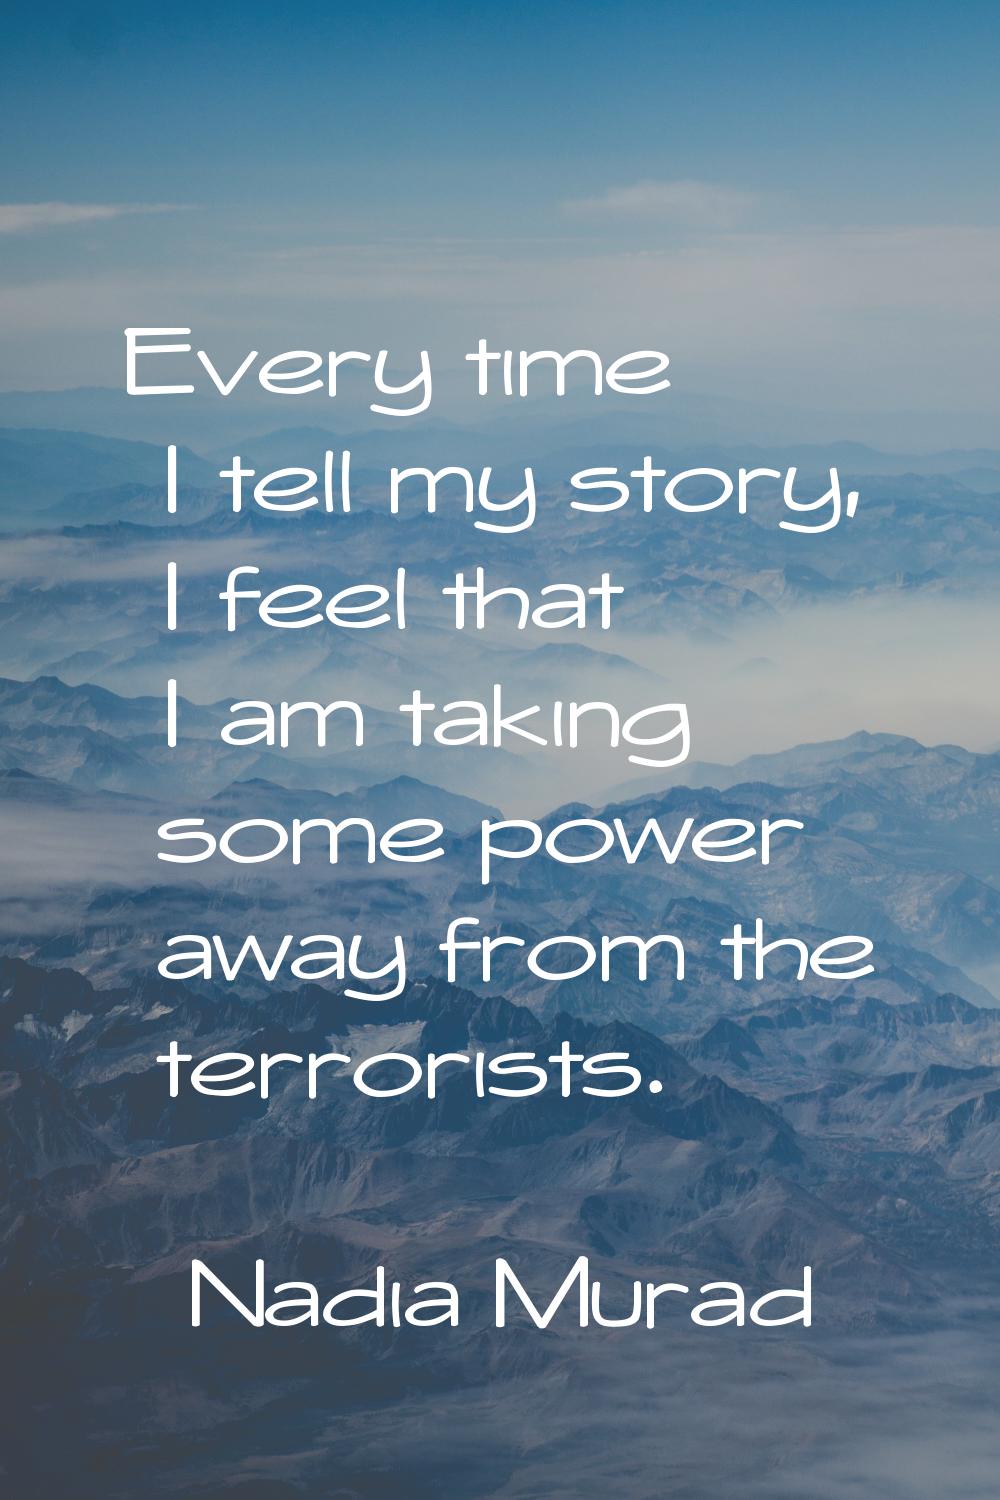 Every time I tell my story, I feel that I am taking some power away from the terrorists.